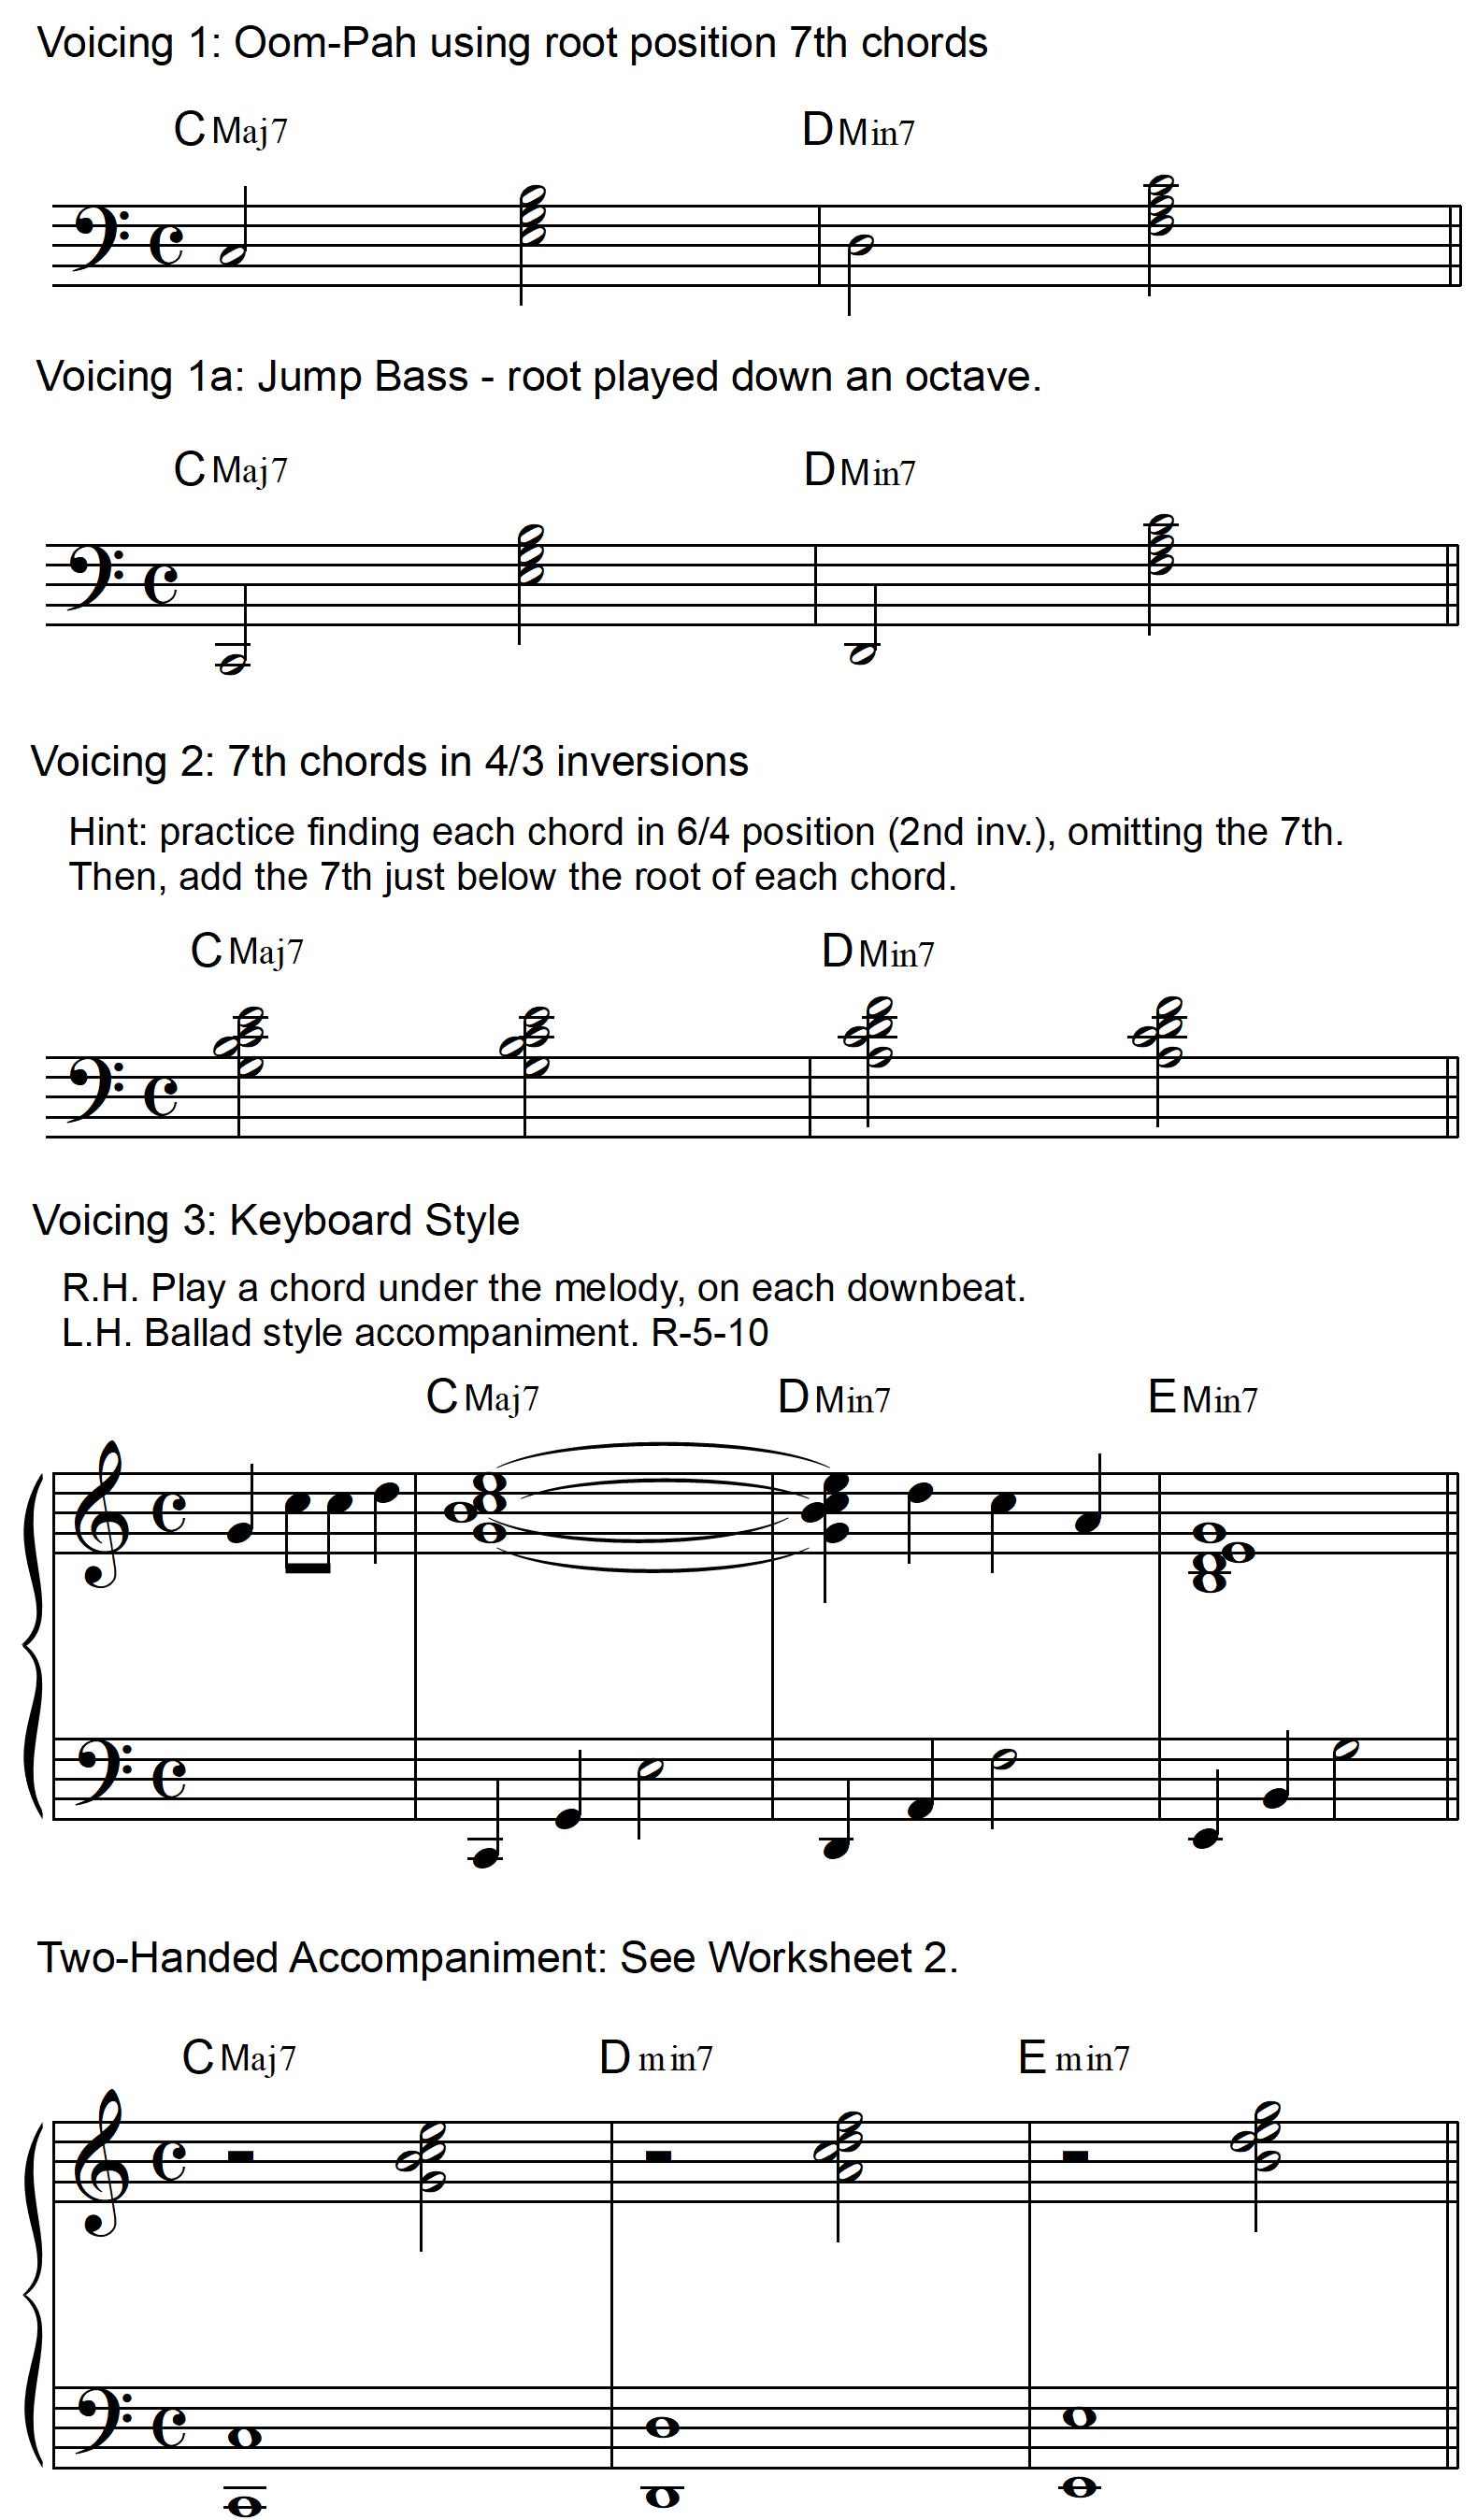 suggested voicings